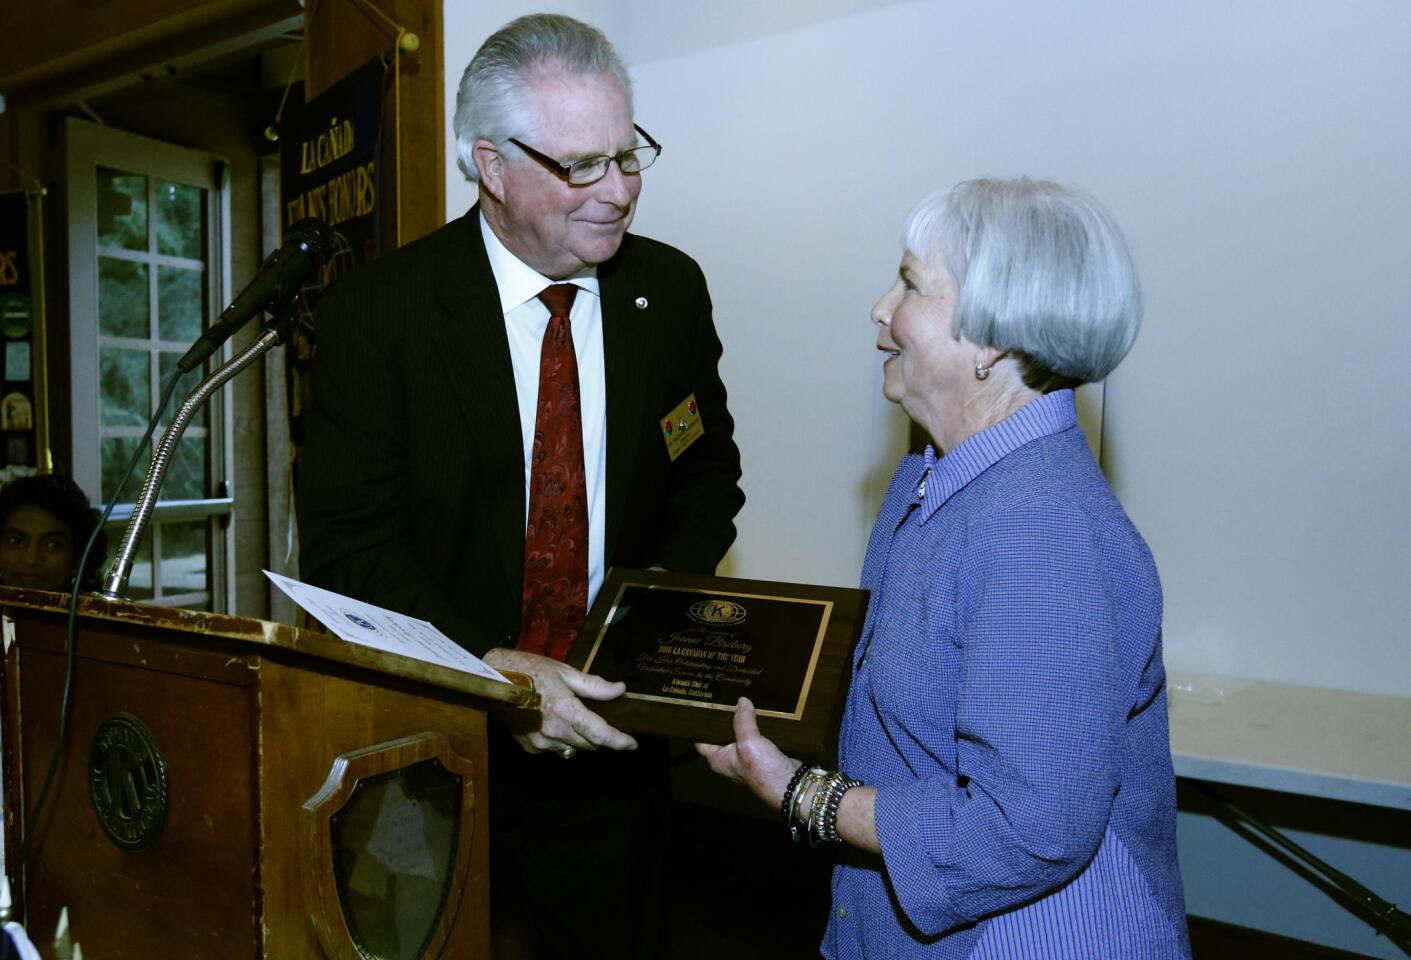 Kiwanis Club of La Cañada president Dr. Michael Leininger gives Jeanne Broberg the plaque for being named 2016 La Cañadan of the Year, during award luncheon at Descanso Gardens in La Cañada Flintridge on Wednesday, April 26, 2017.